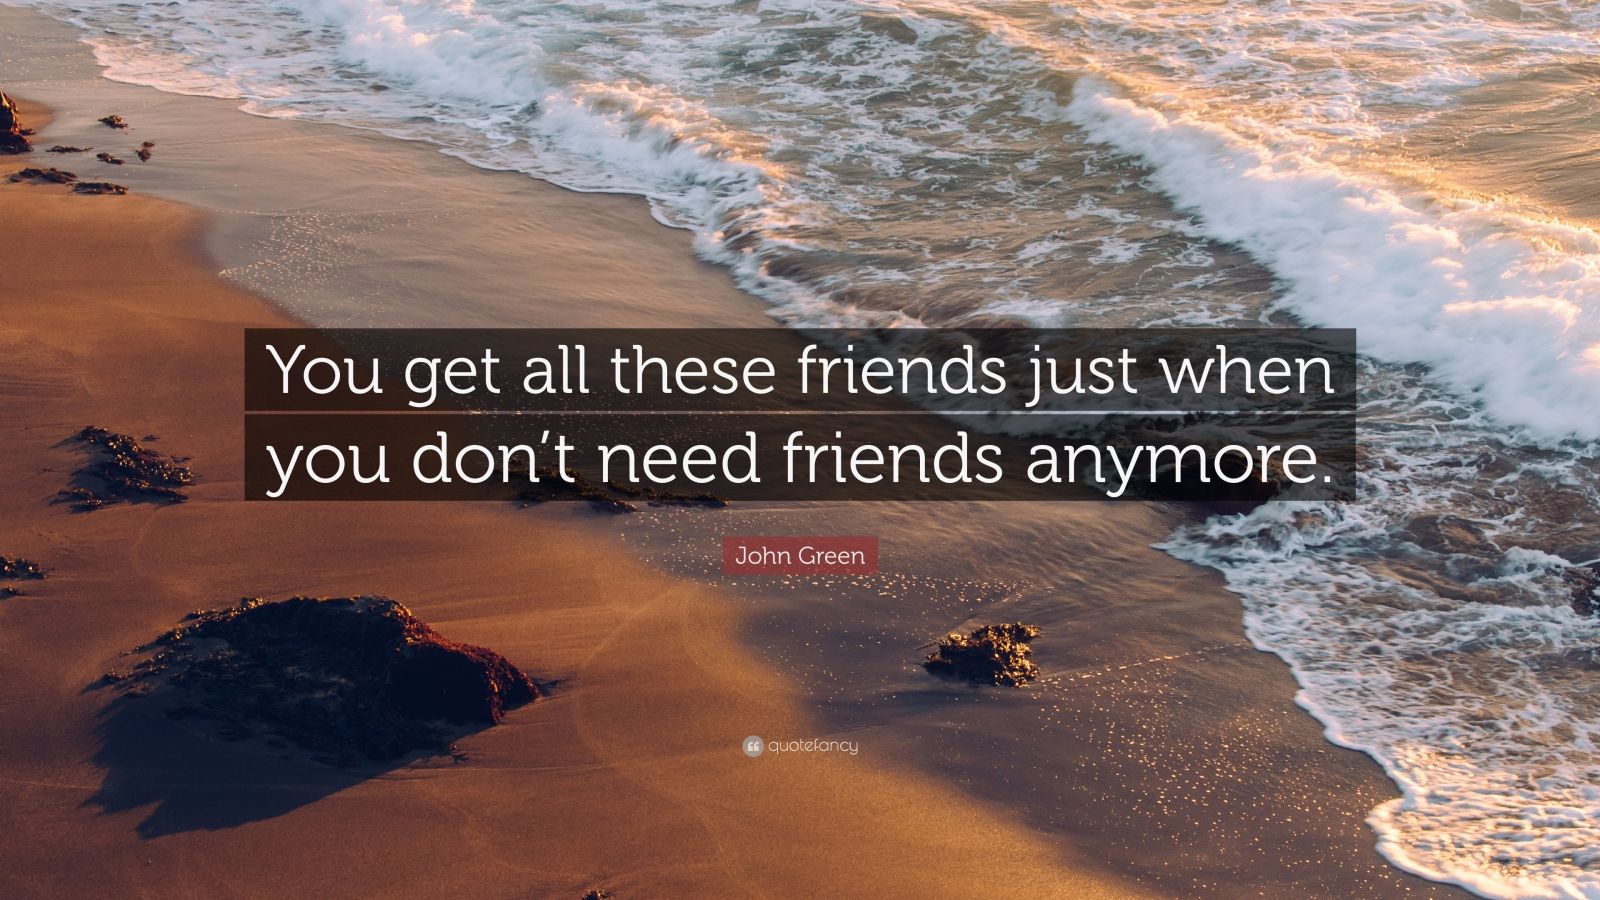 John Green Quote: “You get all these friends just when you don’t need ...